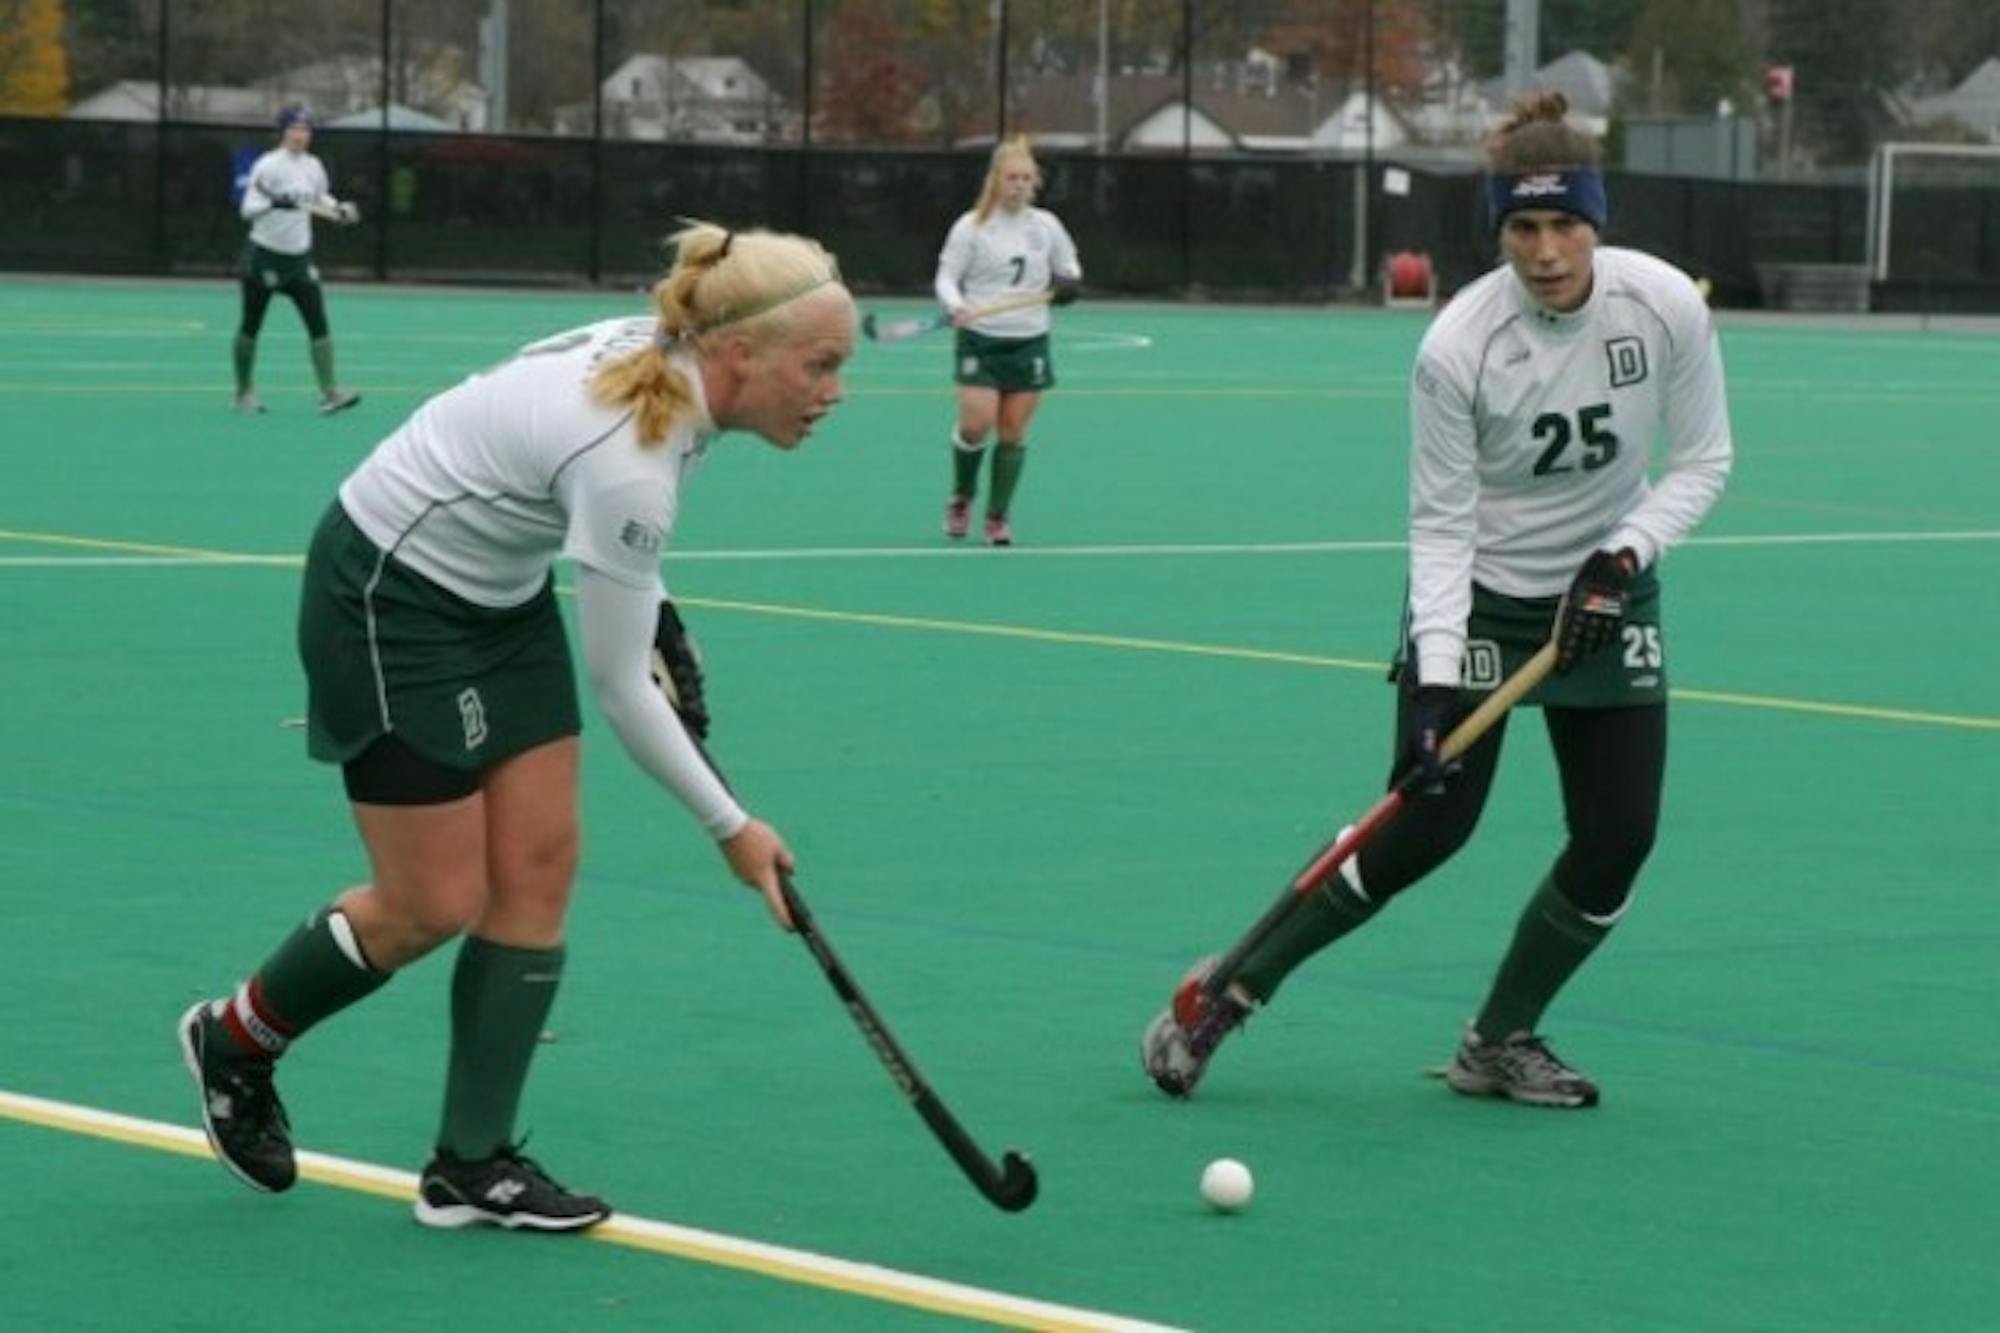 The Class of 2011 looks to be one of the strongest in recent memory for the field hockey program.